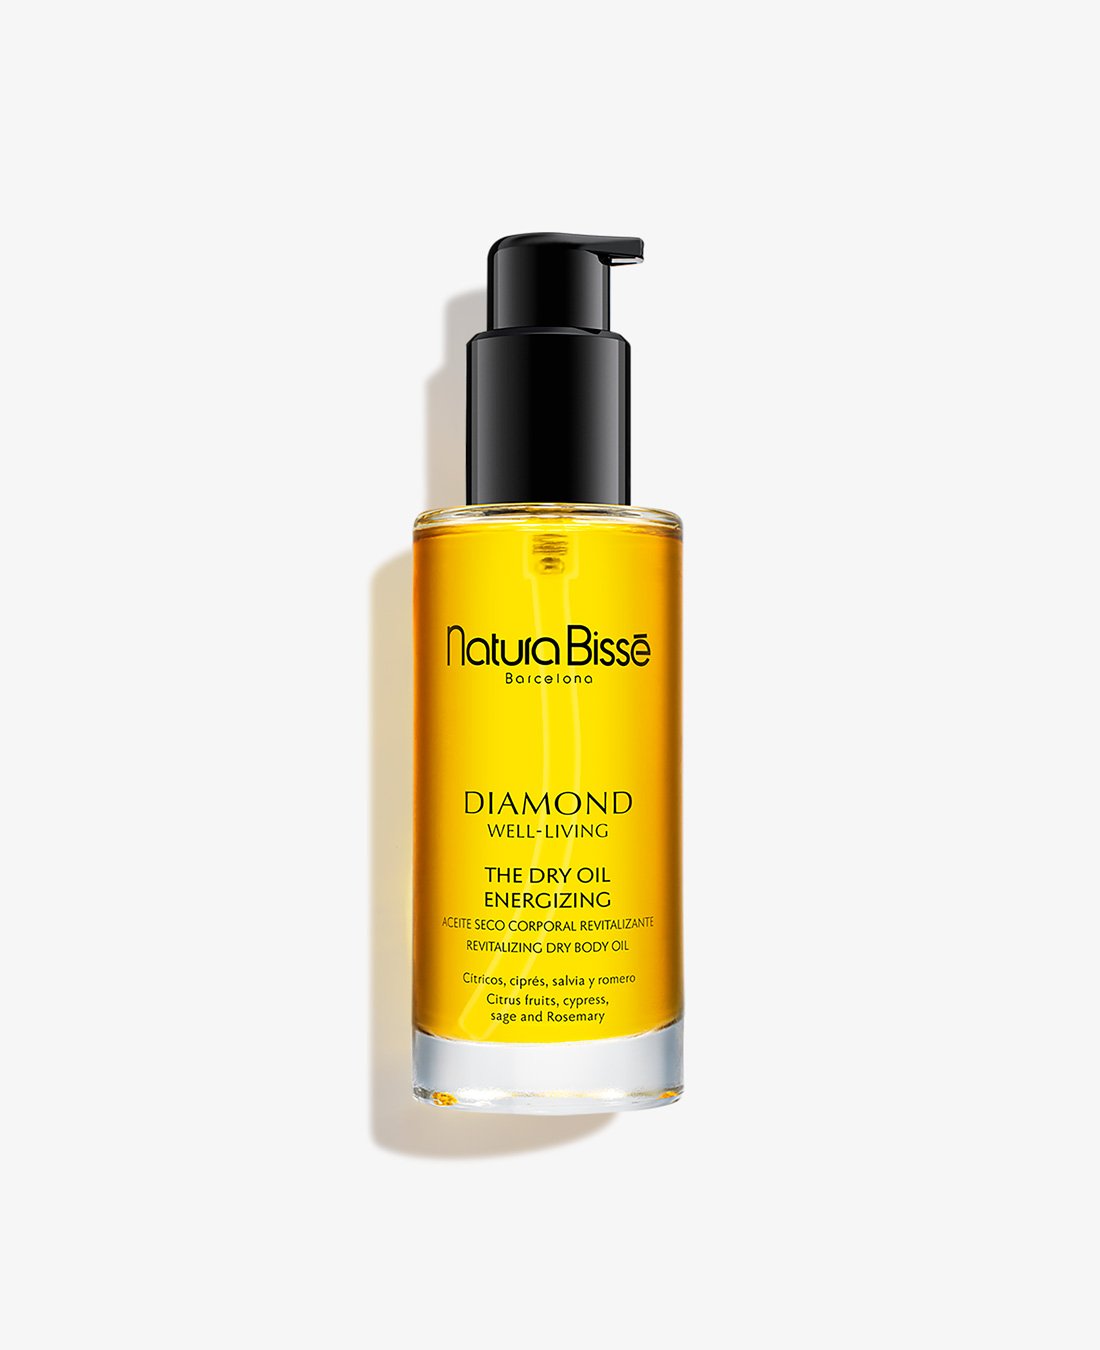 the dry oil - energizing - Oils - Natura Bissé